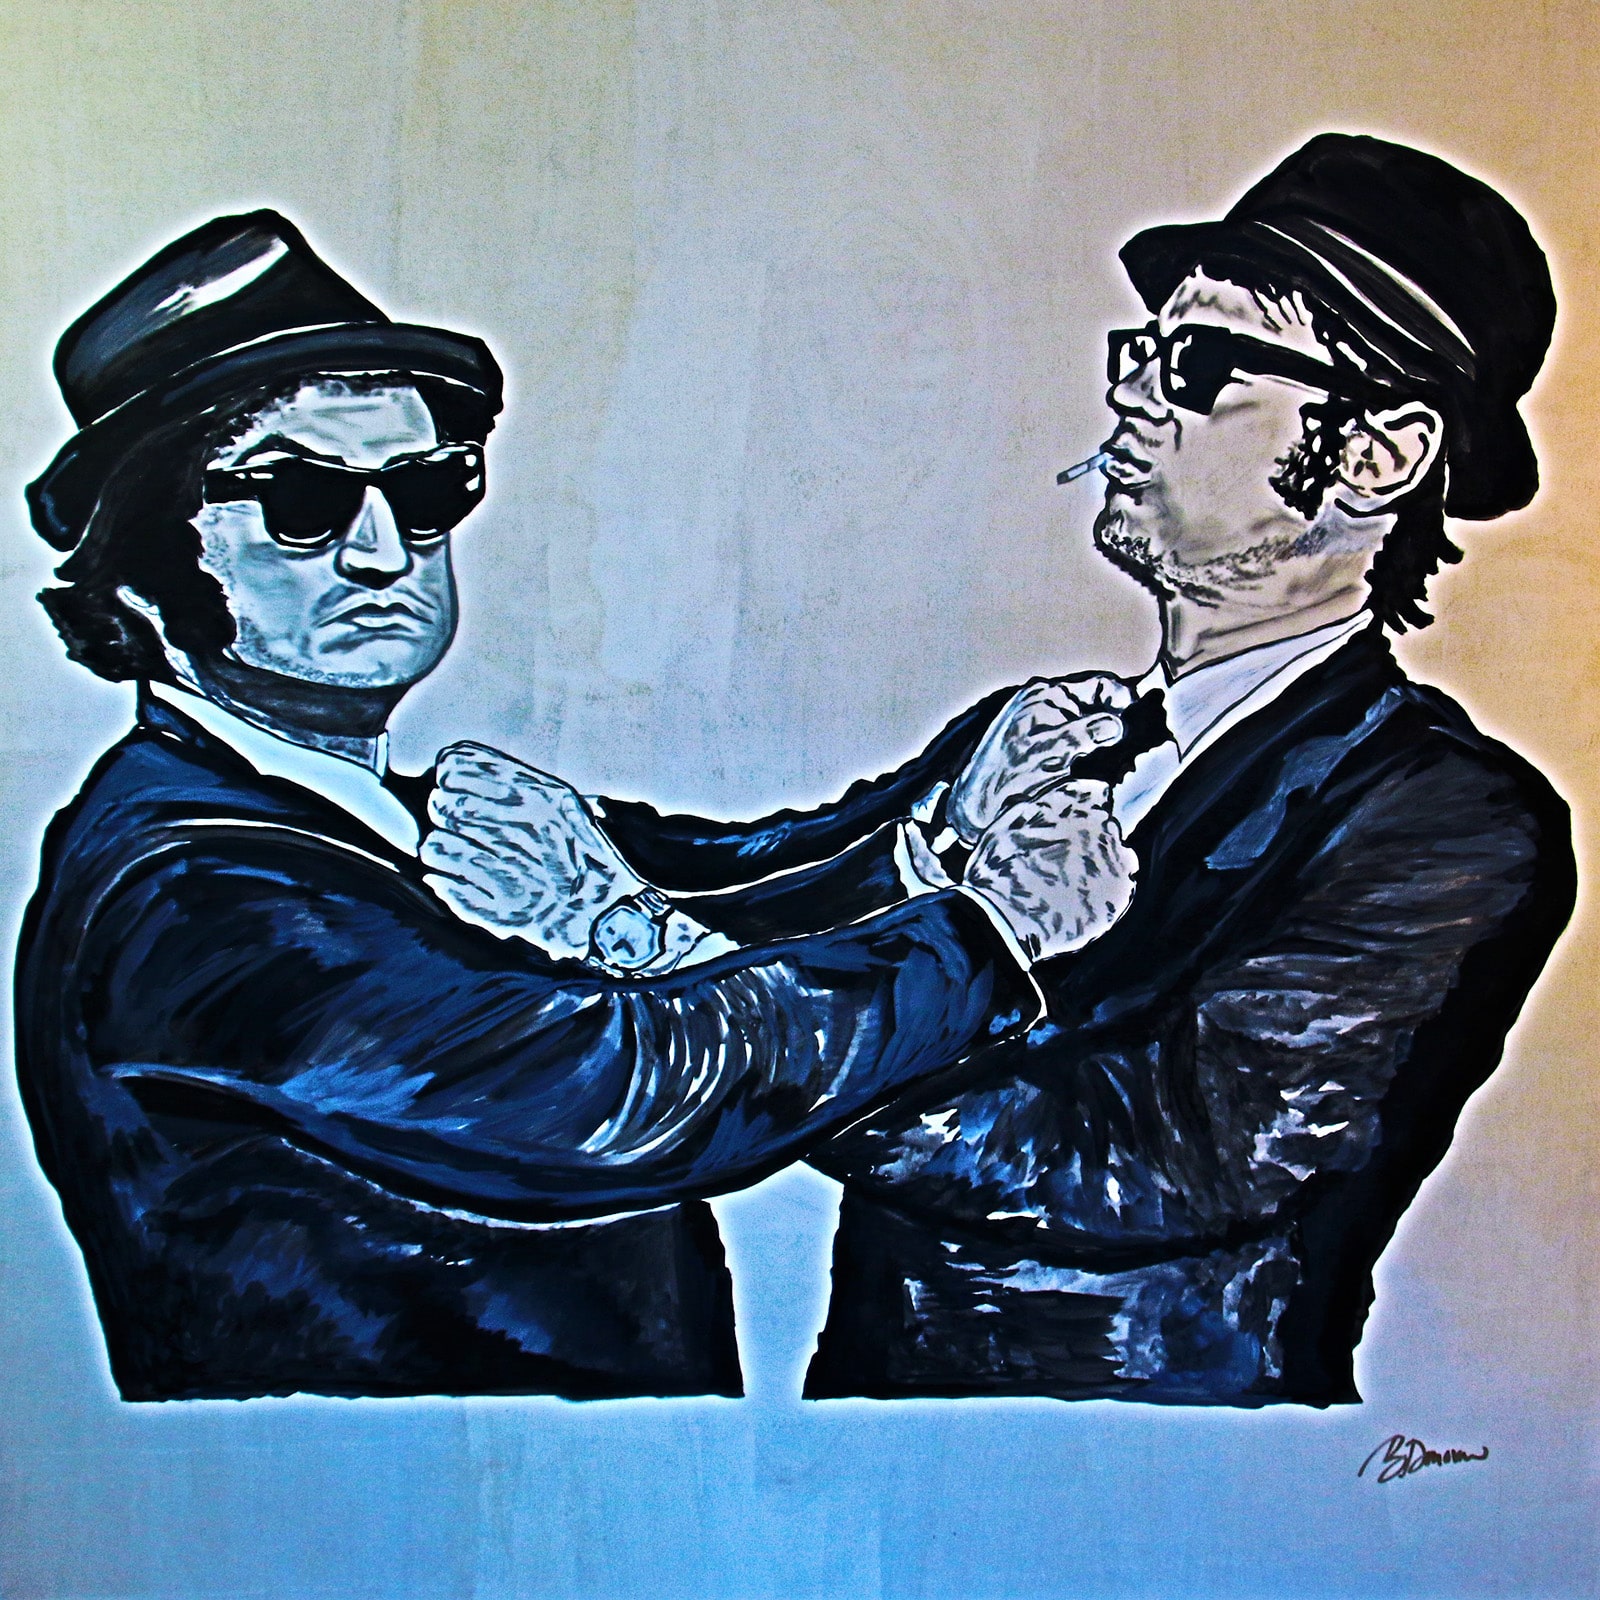 "Blues Brothers Showtime" Mixed Media on Wood Cradled Canvas, 48x48in by Barbara Lee Donovan